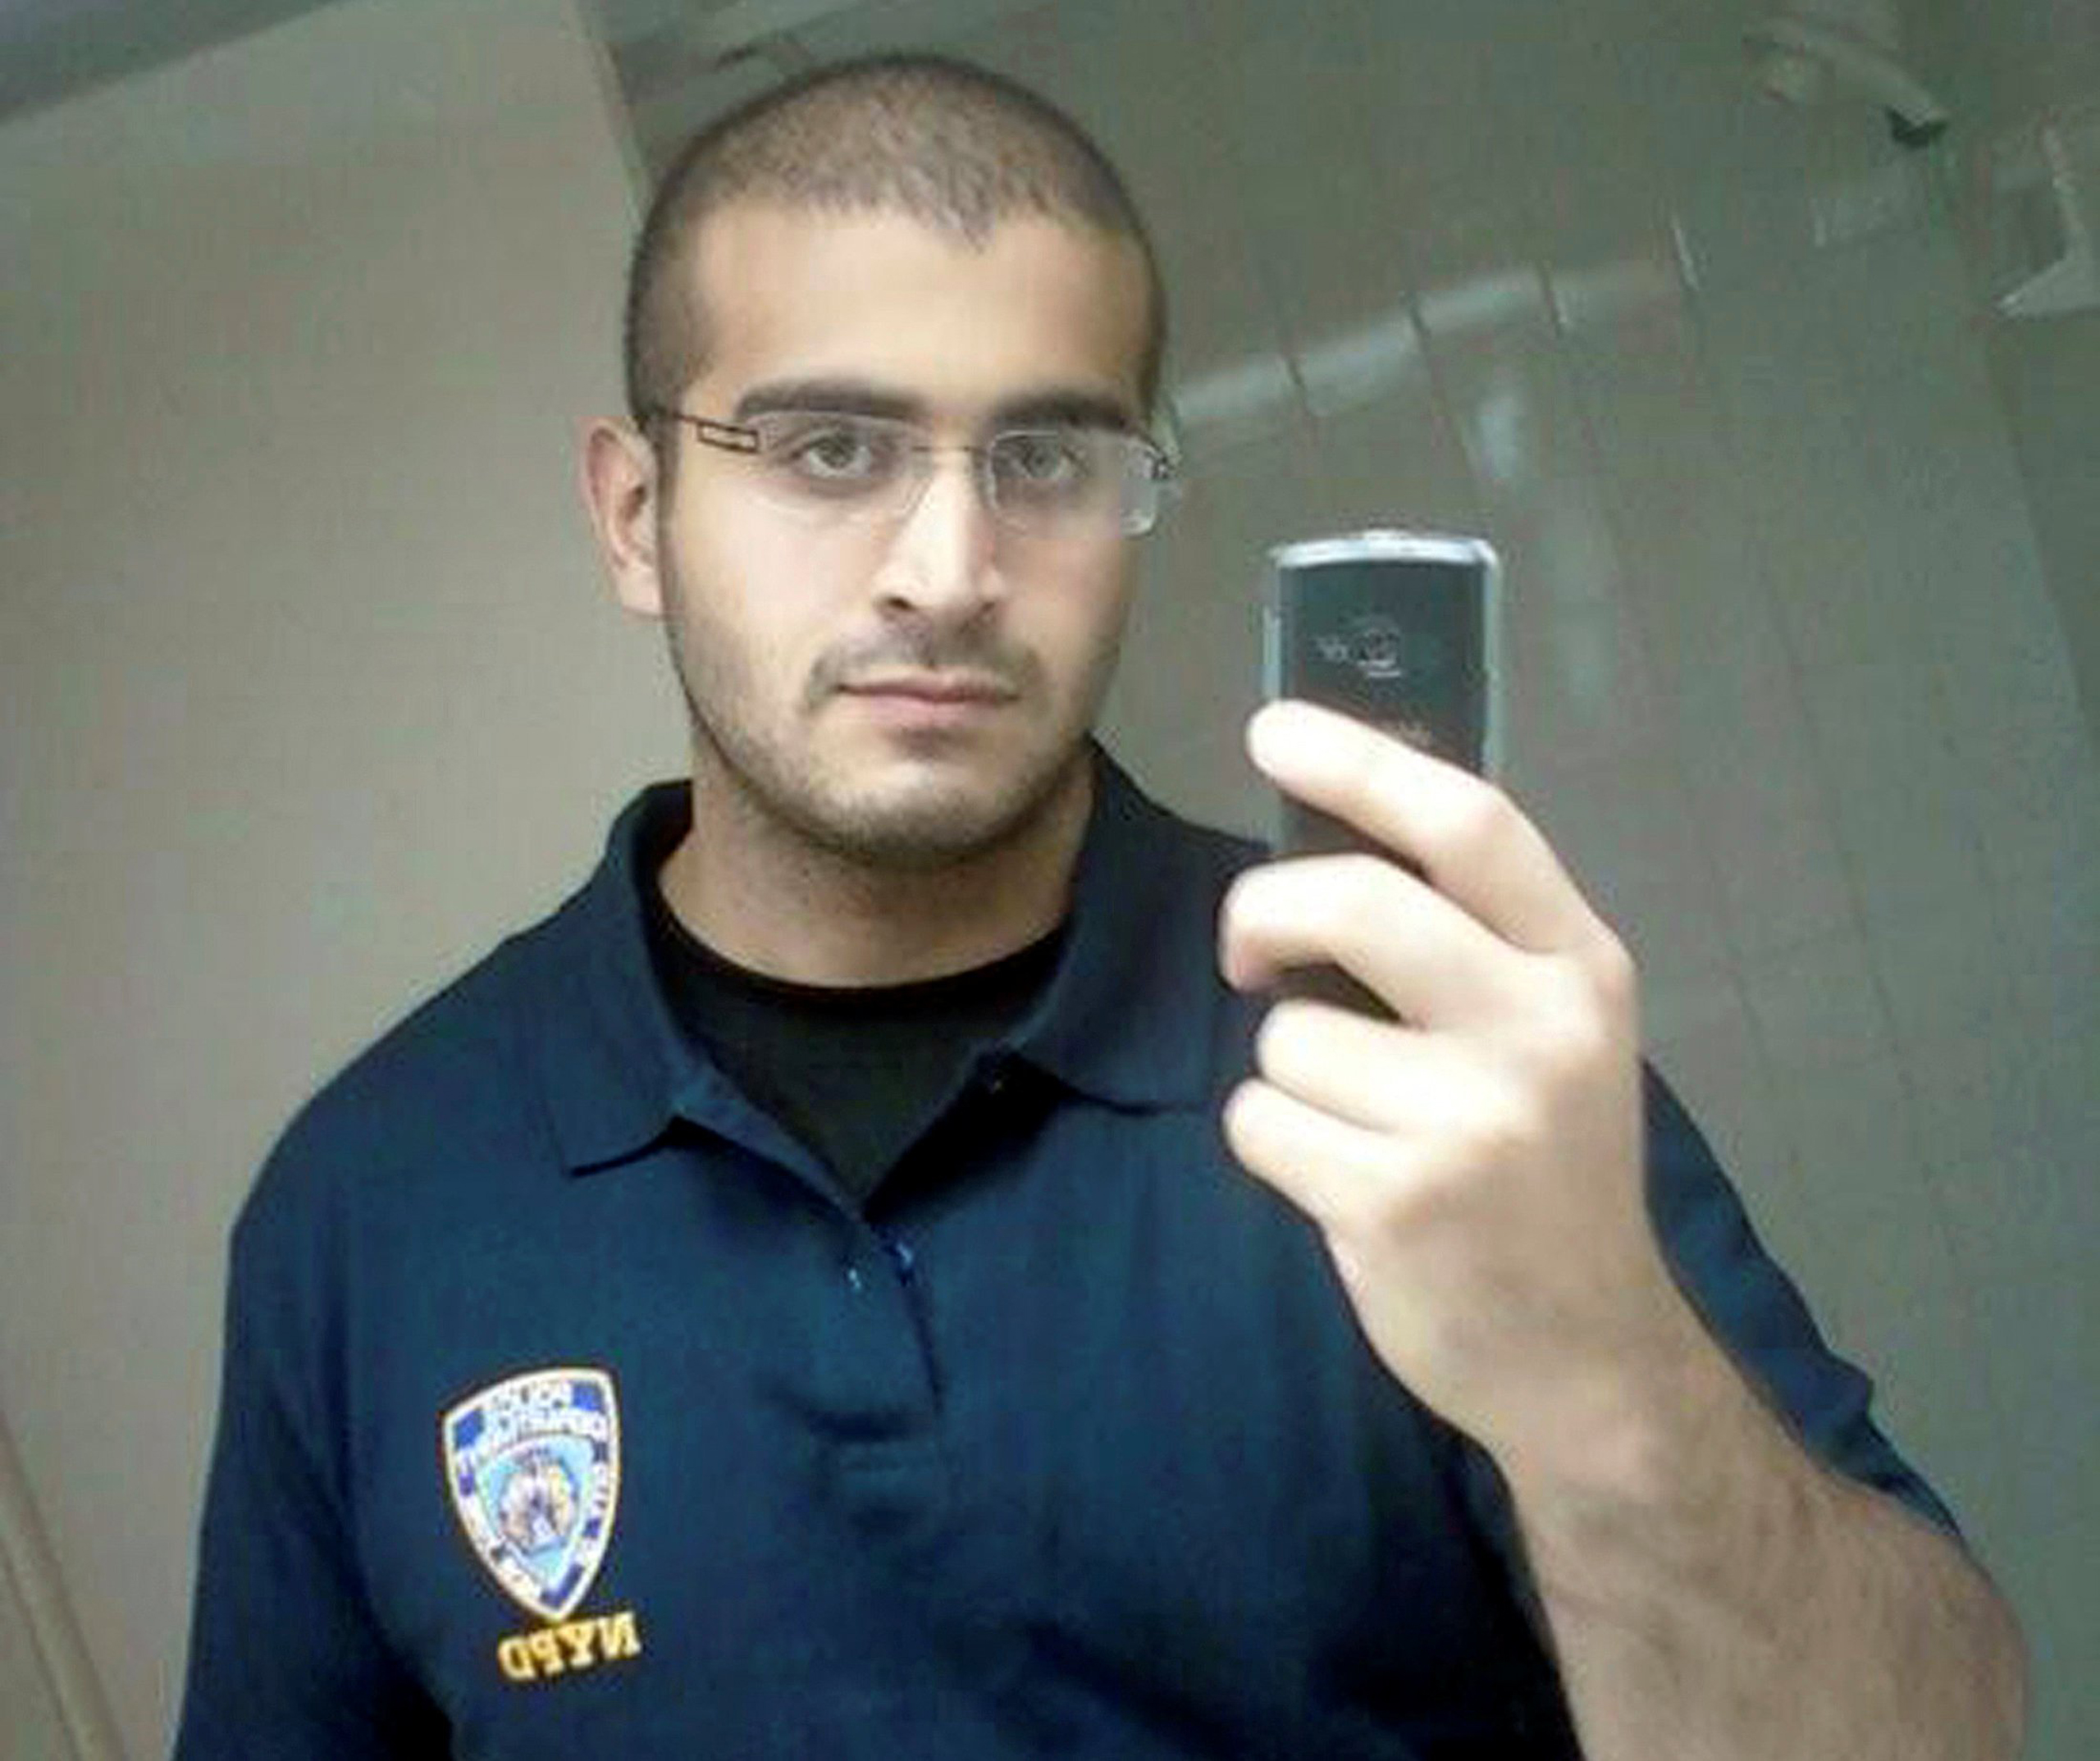 An undated photo from a social media account of Omar Mateen, who Orlando Police have identified as the suspect in the mass shooting at a gay nighclub in Orlando, on June 12, 2016. (Reuters)